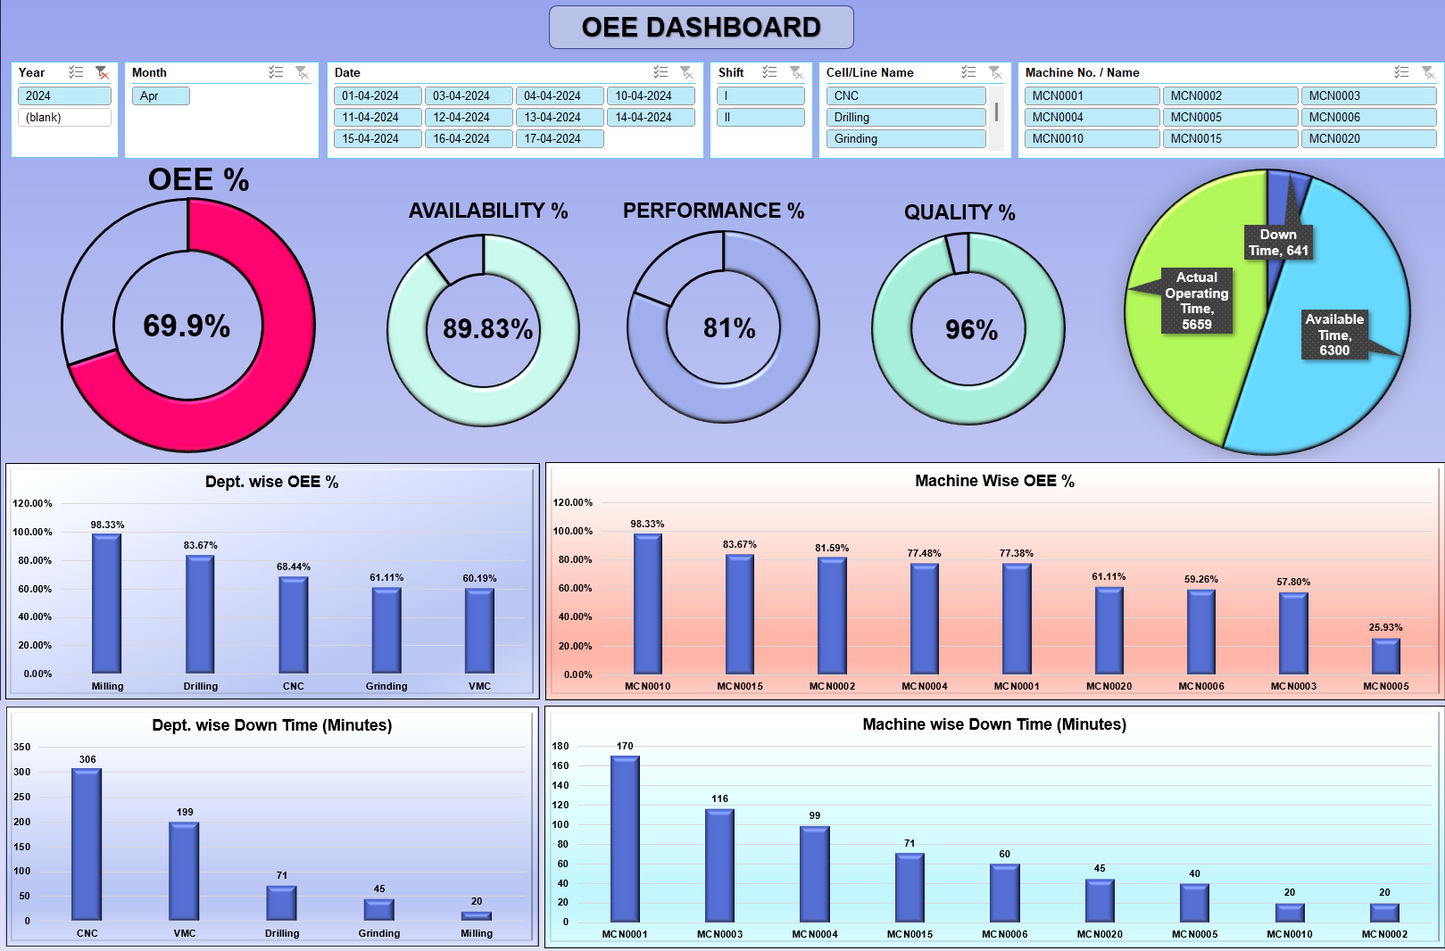 Excel template Production report with OEE graphical dashboard